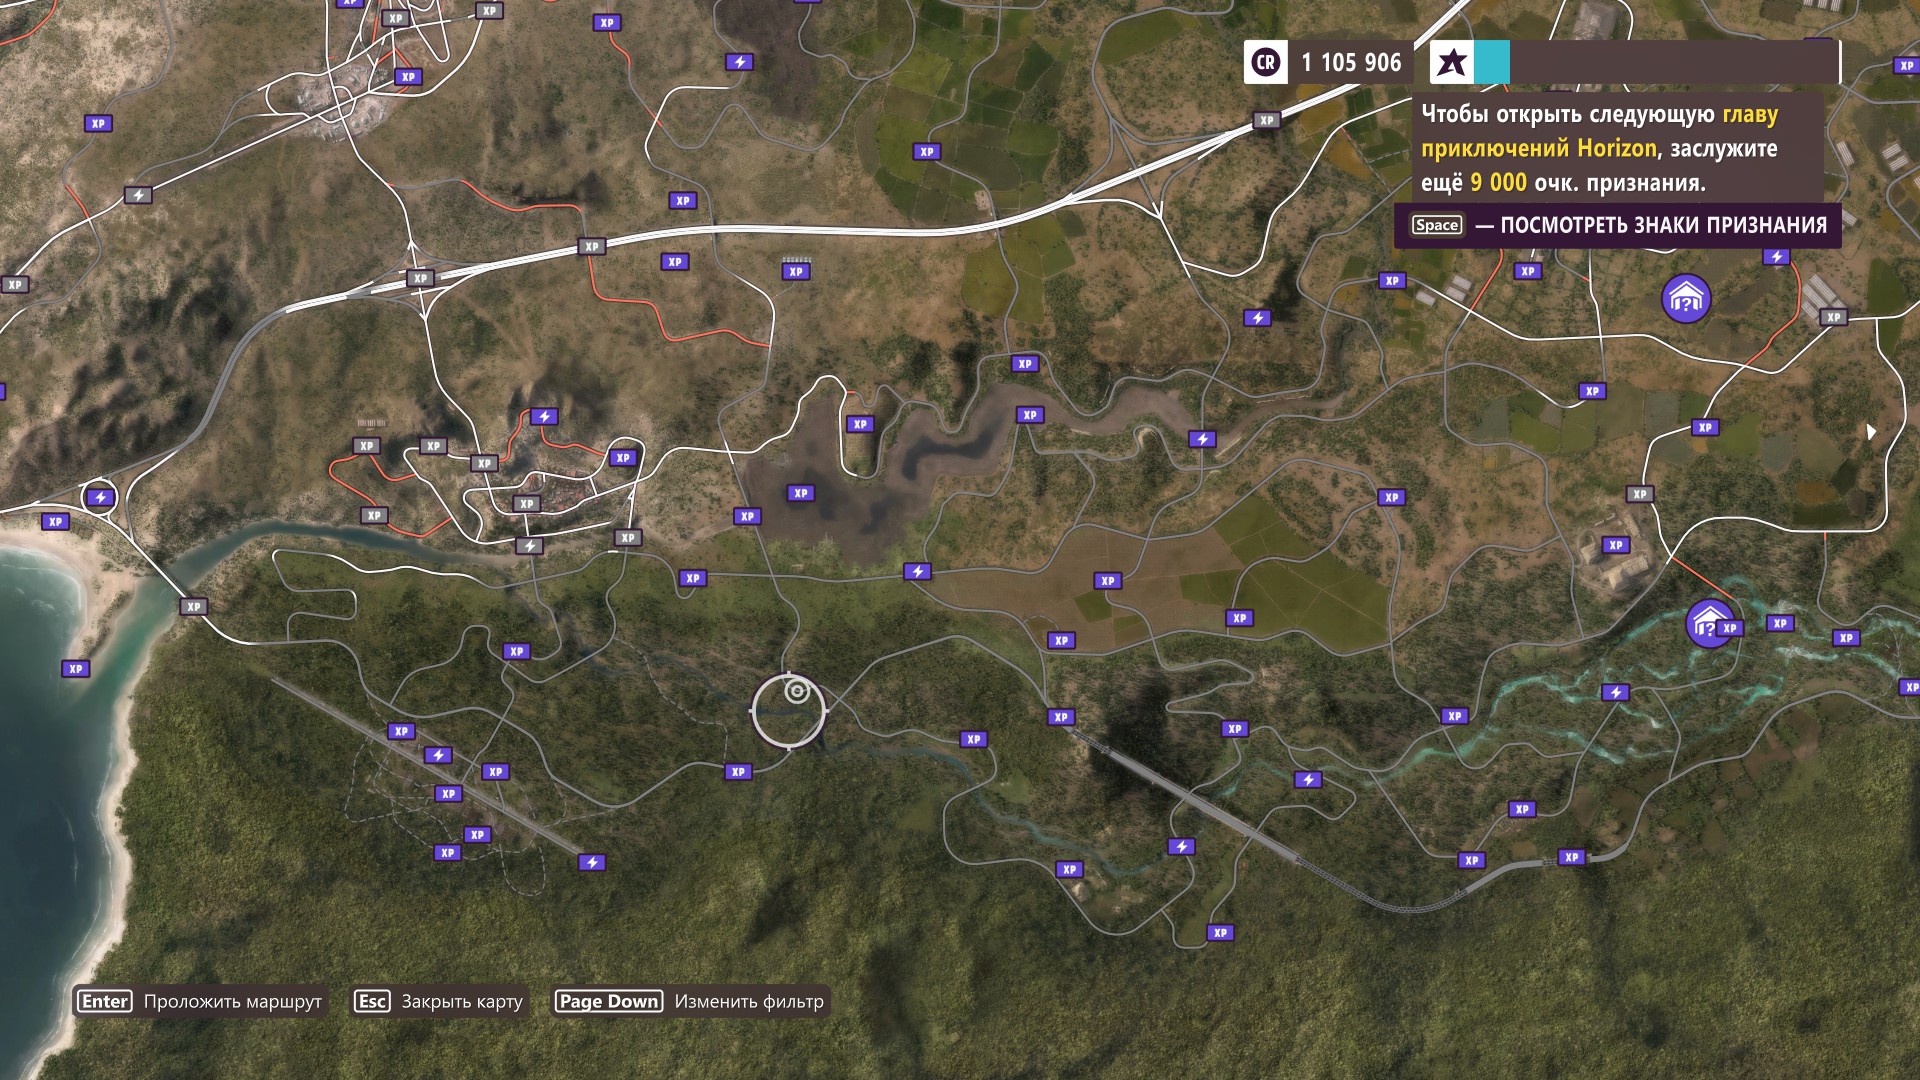 Forza Horizon 5 All Locations Map Guide - All Barn & Influence Boards - Influence Boards Location - 0C5A6A2